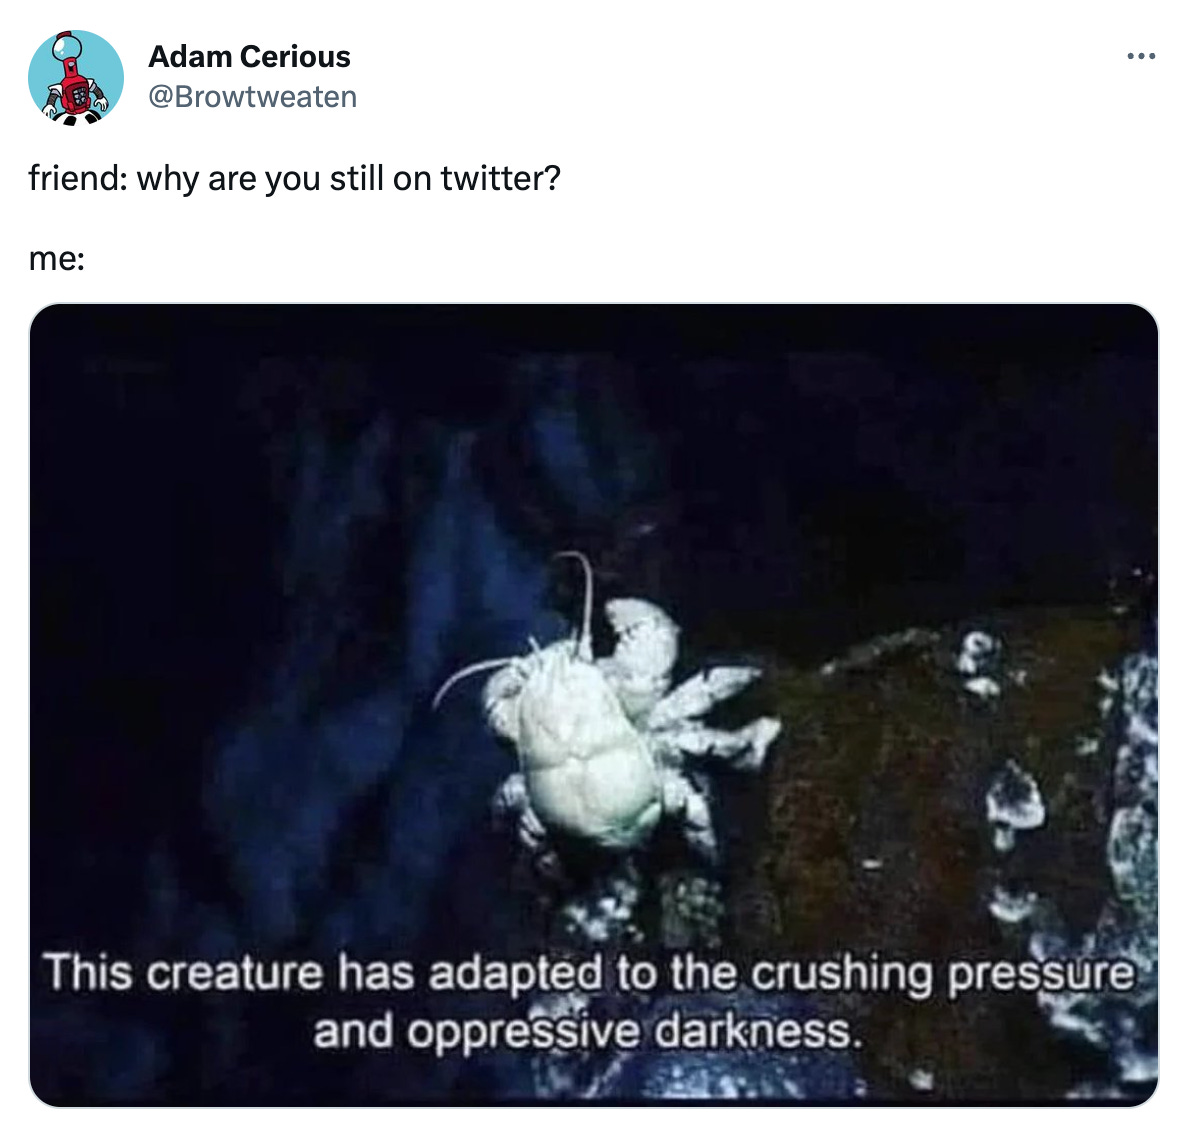 tweet from Adam Cerious (@browtweaten) that reads "friend: why are you still on twitter? me: " and has an image of a white crab in the depths of the ocean that is captioned "This creature has adapted to the crushing pressure and oppressive darkness."